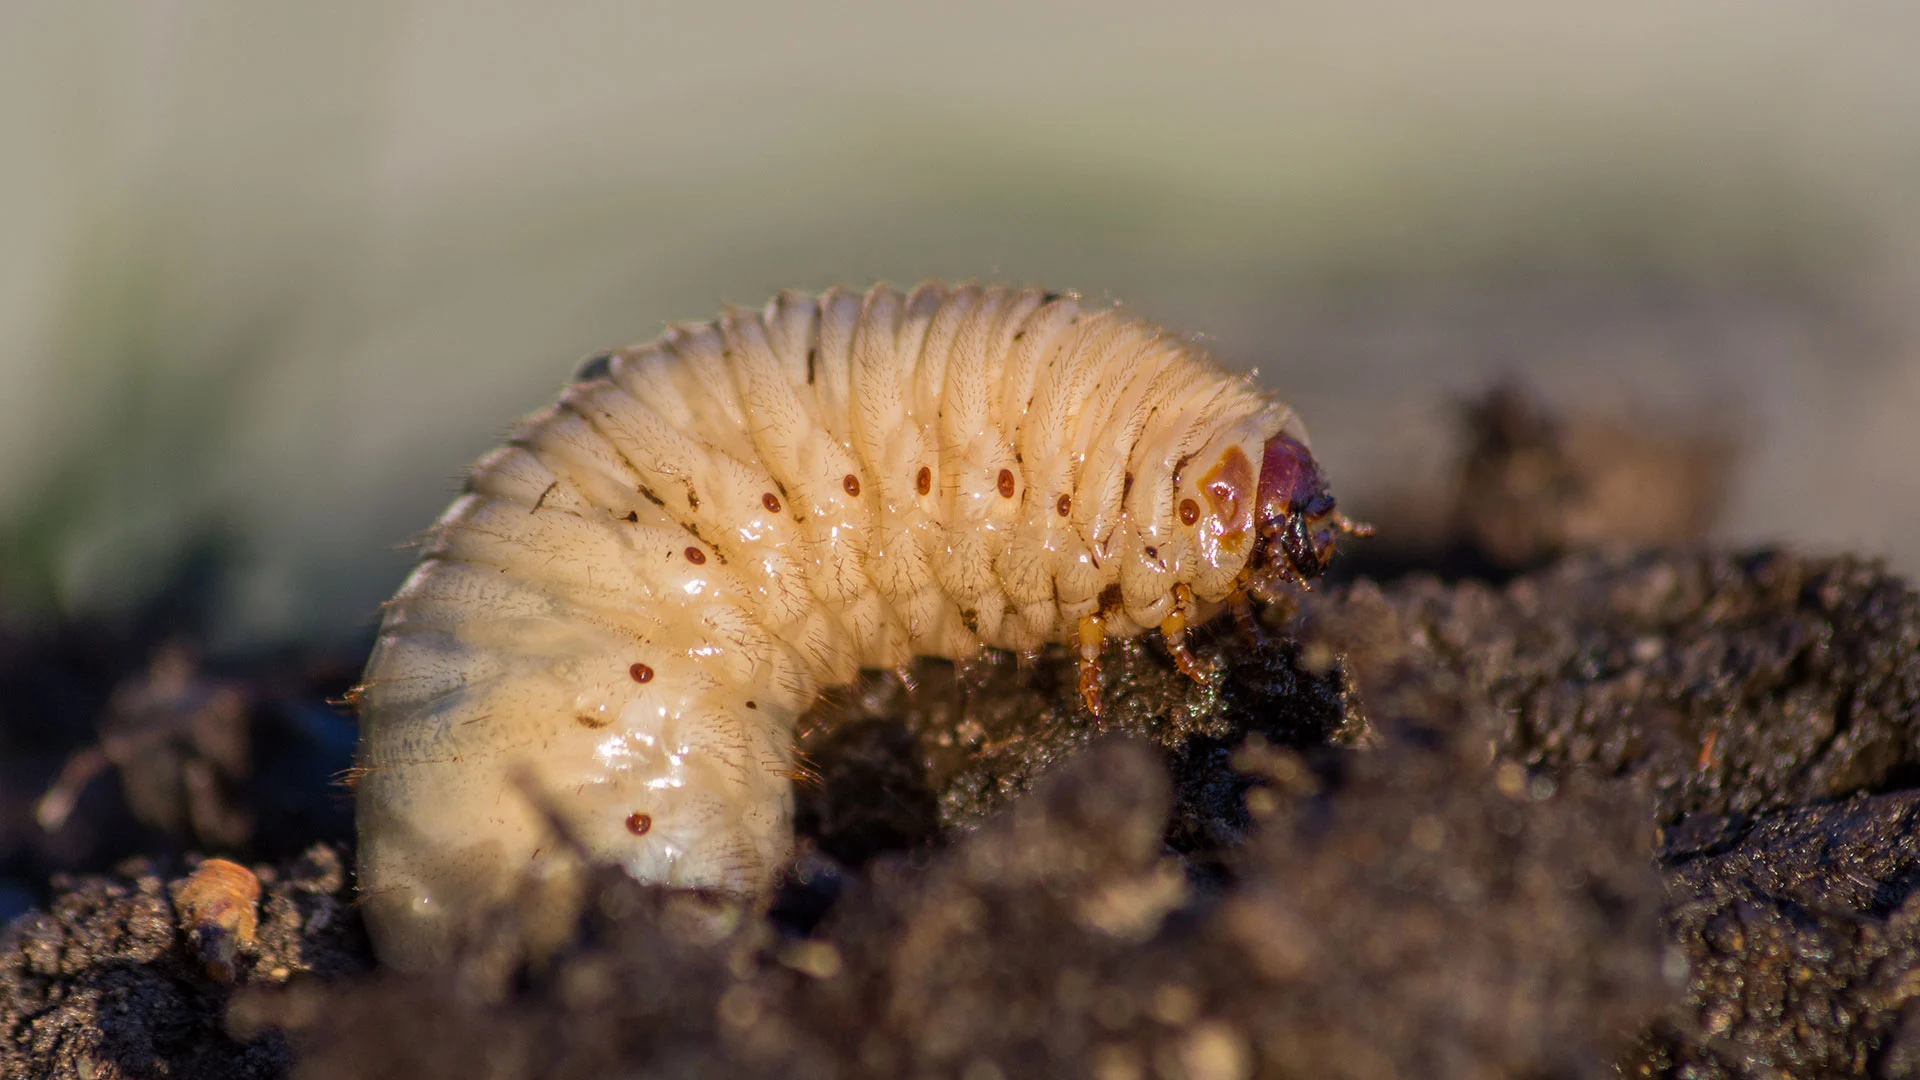  Grubs are a common lawn pest that are lawn insect control service targets.